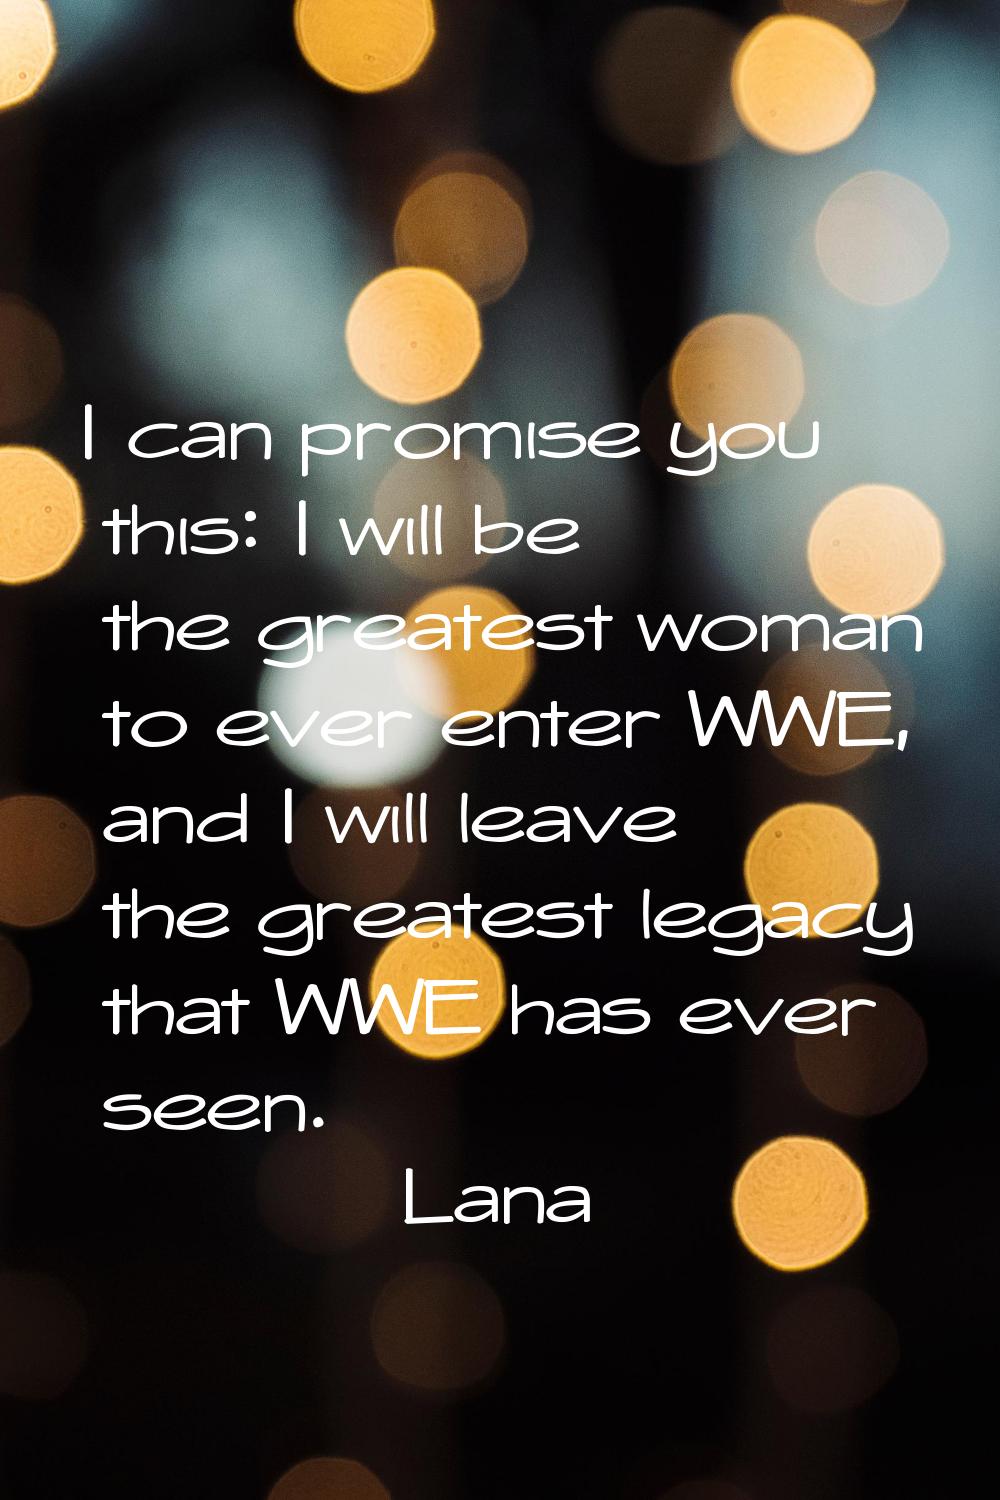 I can promise you this: I will be the greatest woman to ever enter WWE, and I will leave the greate